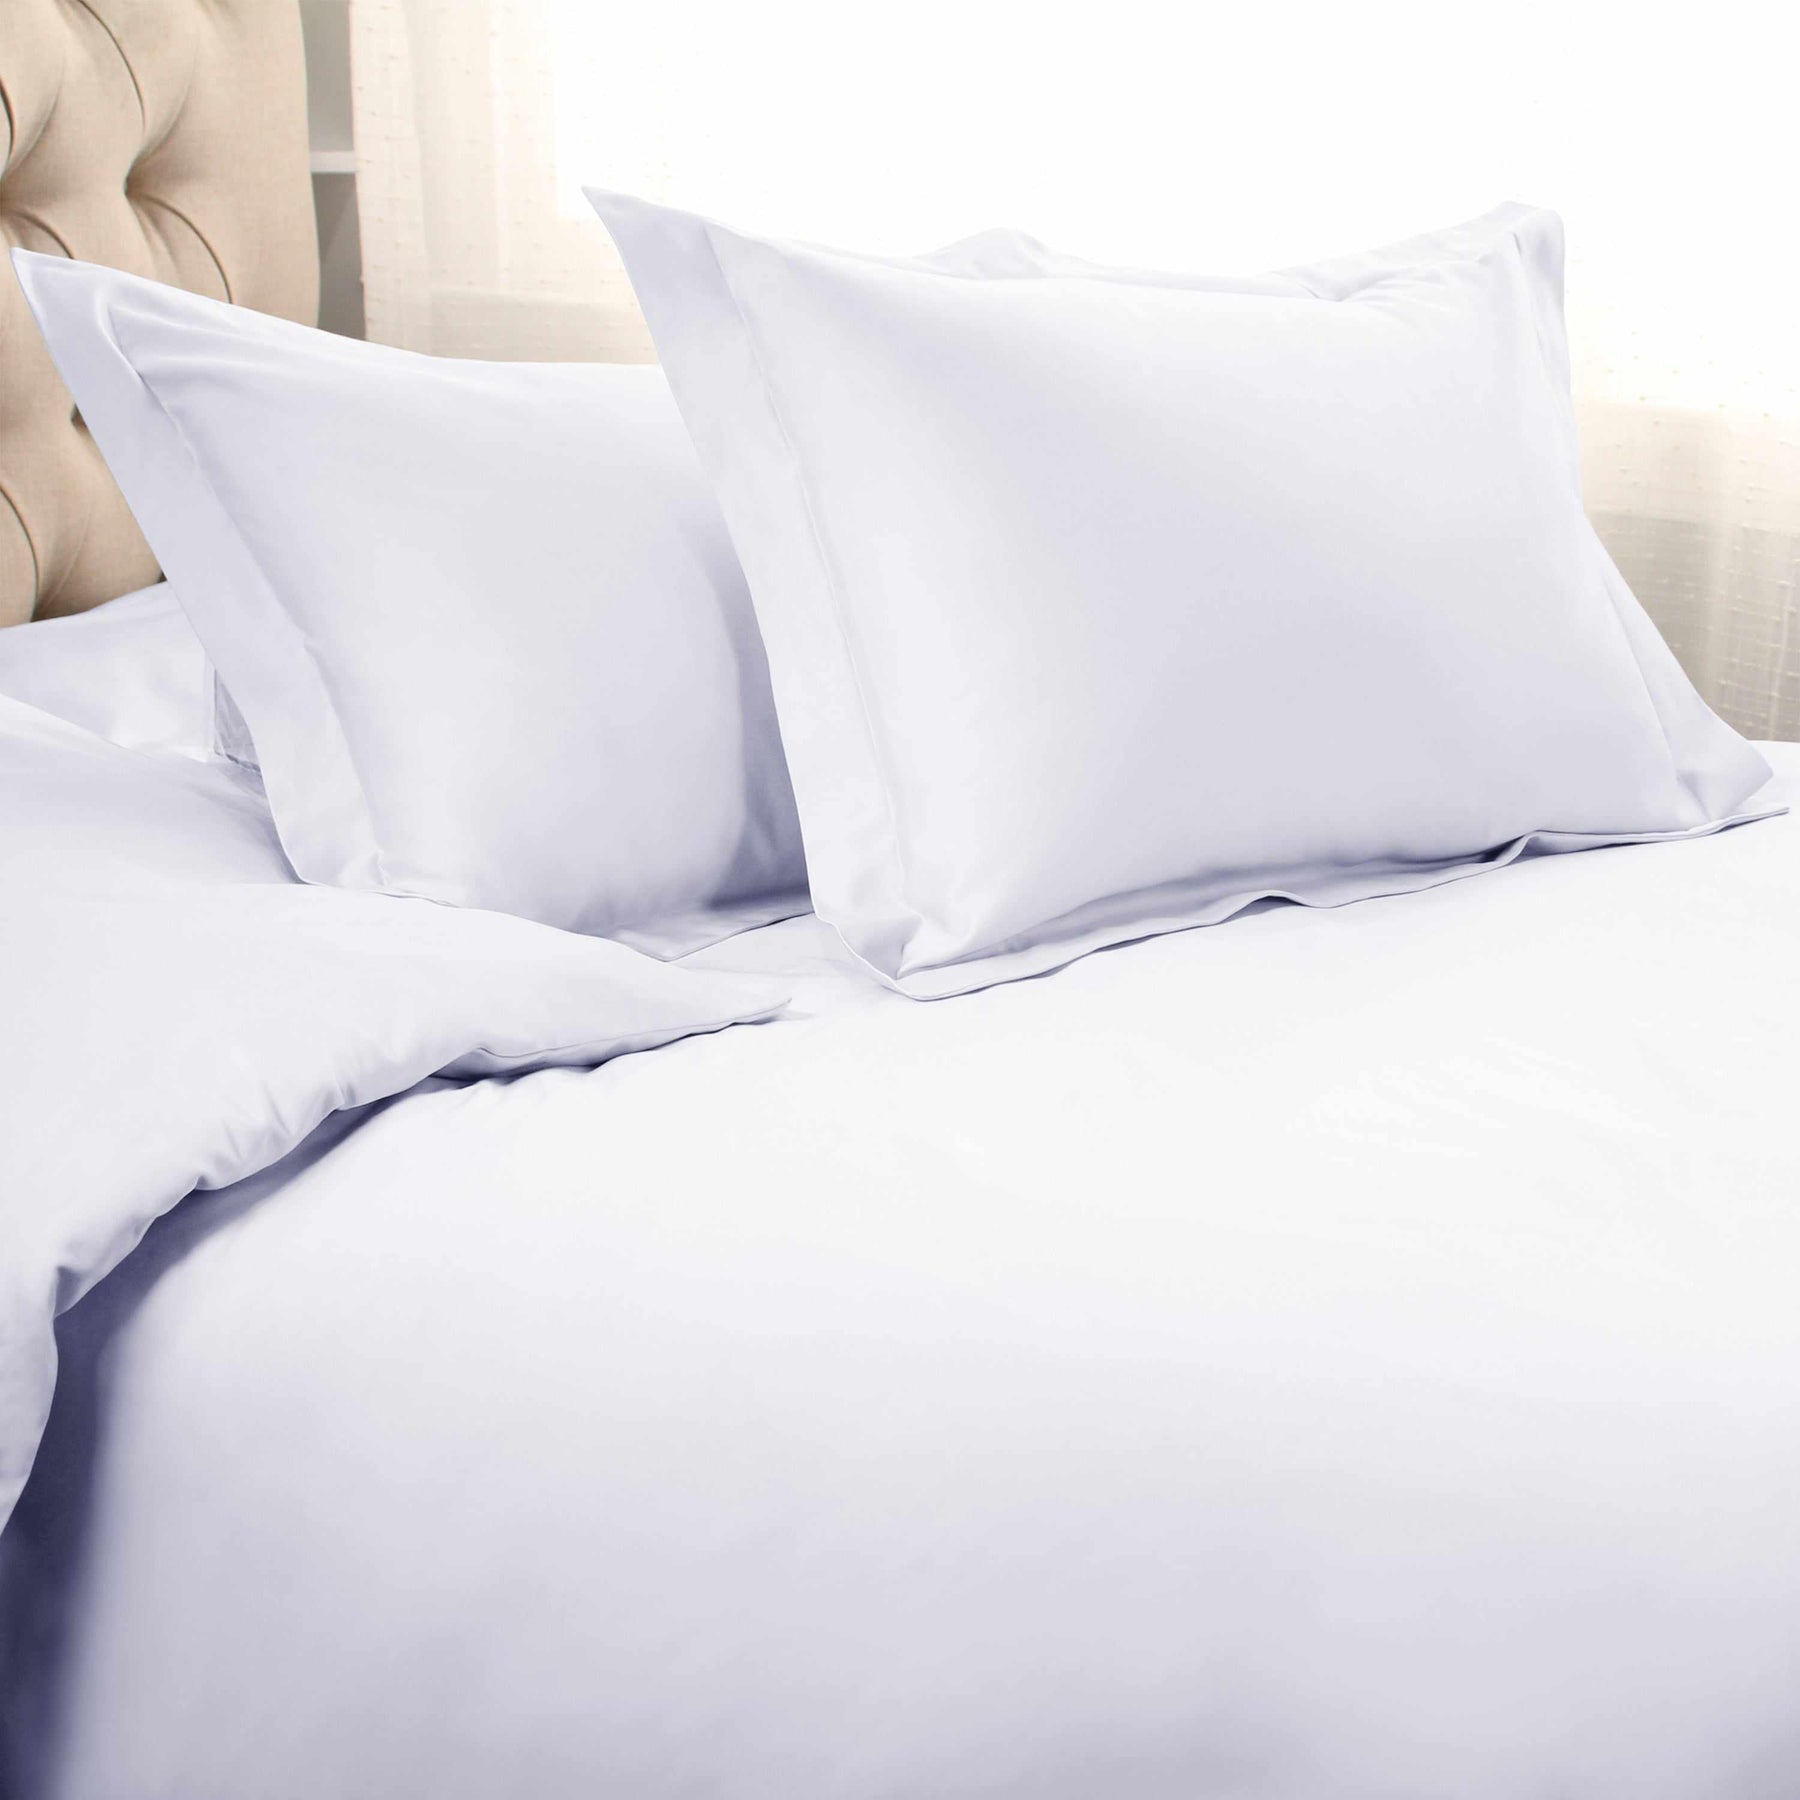  Superior Solid 1500 Thread Count Egyptian Cotton Duvet Cover Set - White